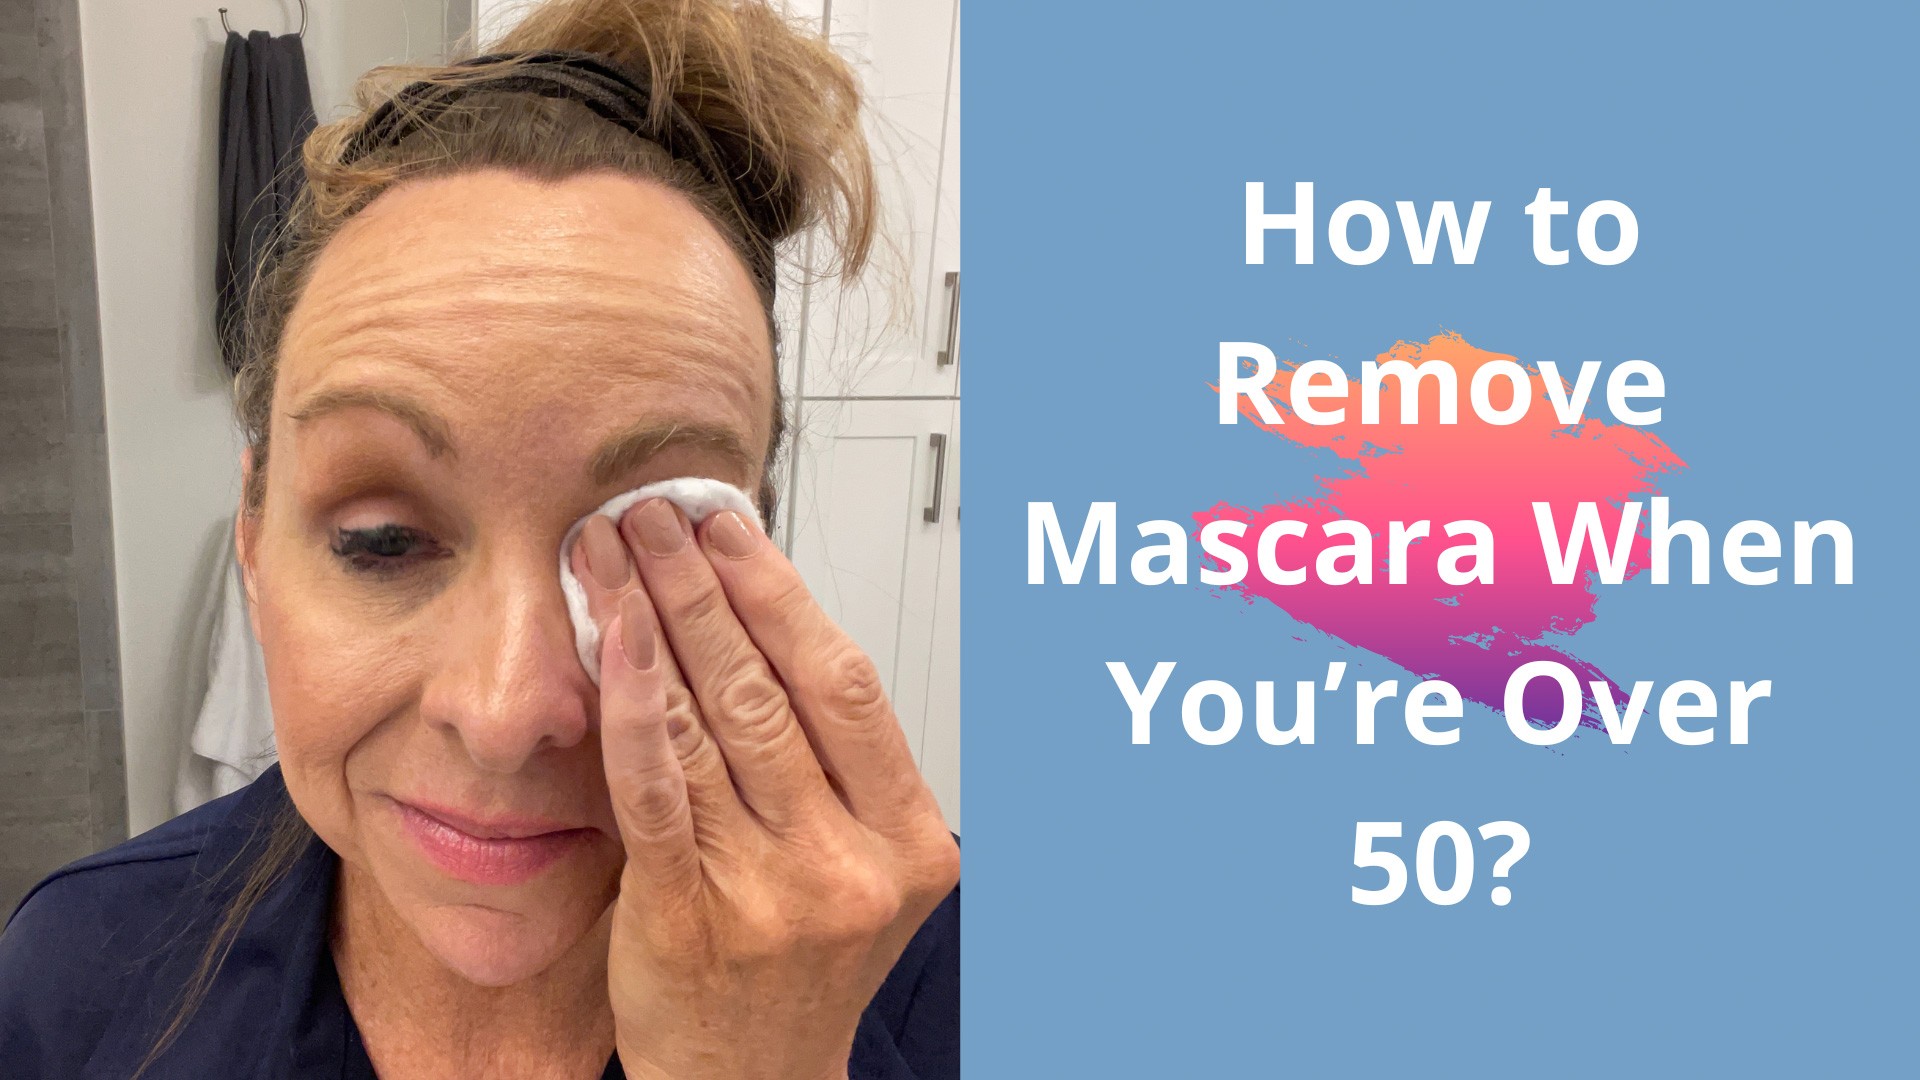 How to remove mascara